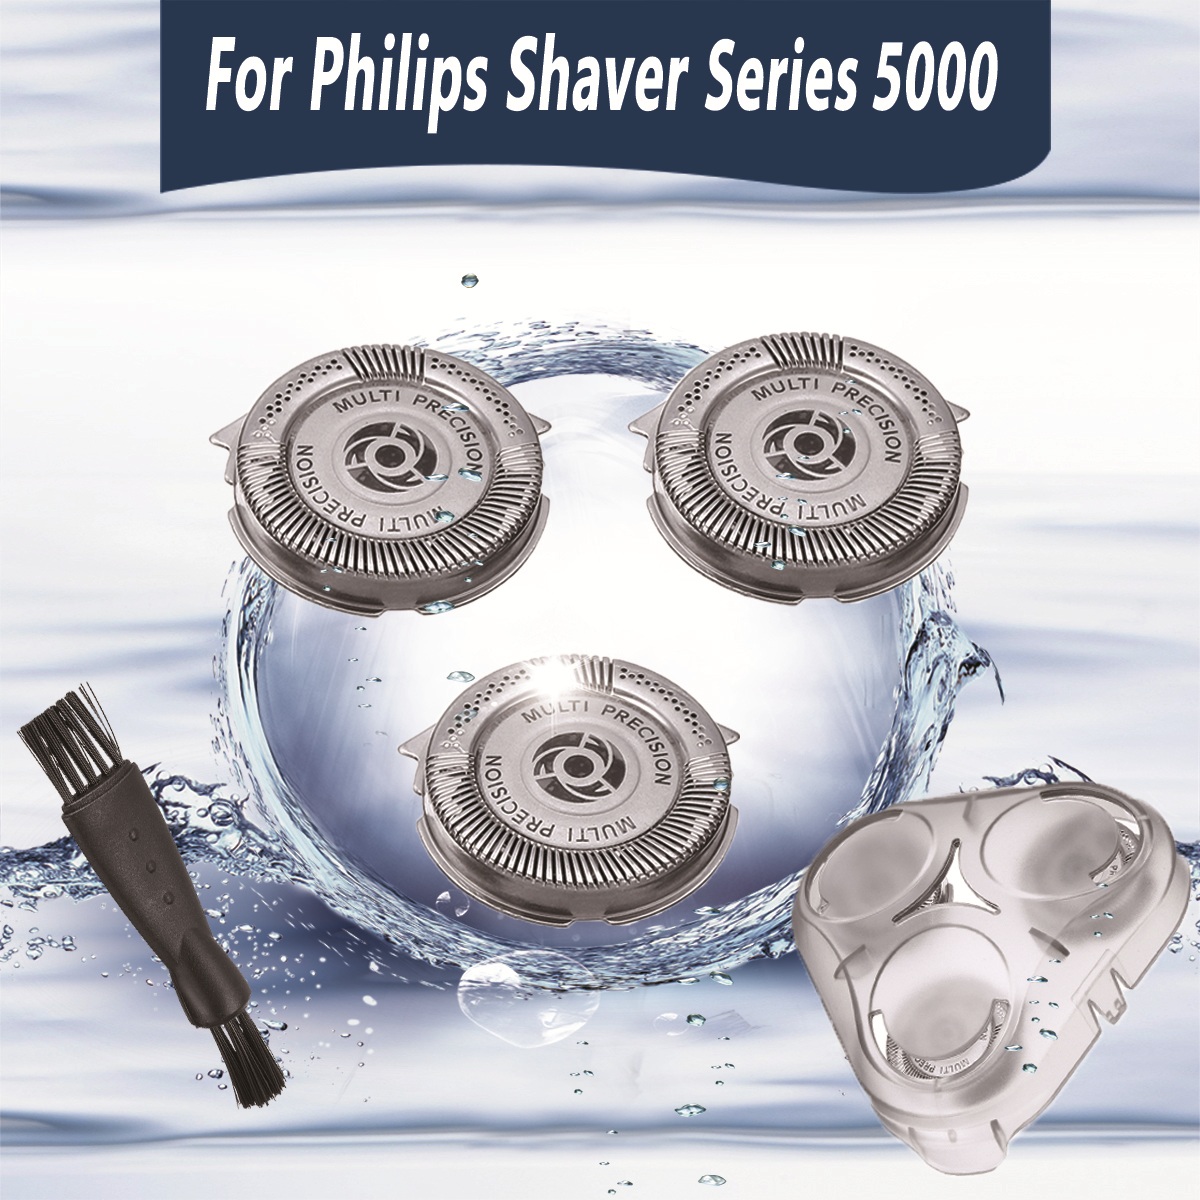 3Pcs-Professional-Shaver-Razor-Head-Replacement-Blades-Cutters-Shaver-Head-Cover-For-Philips-SH50-1400758